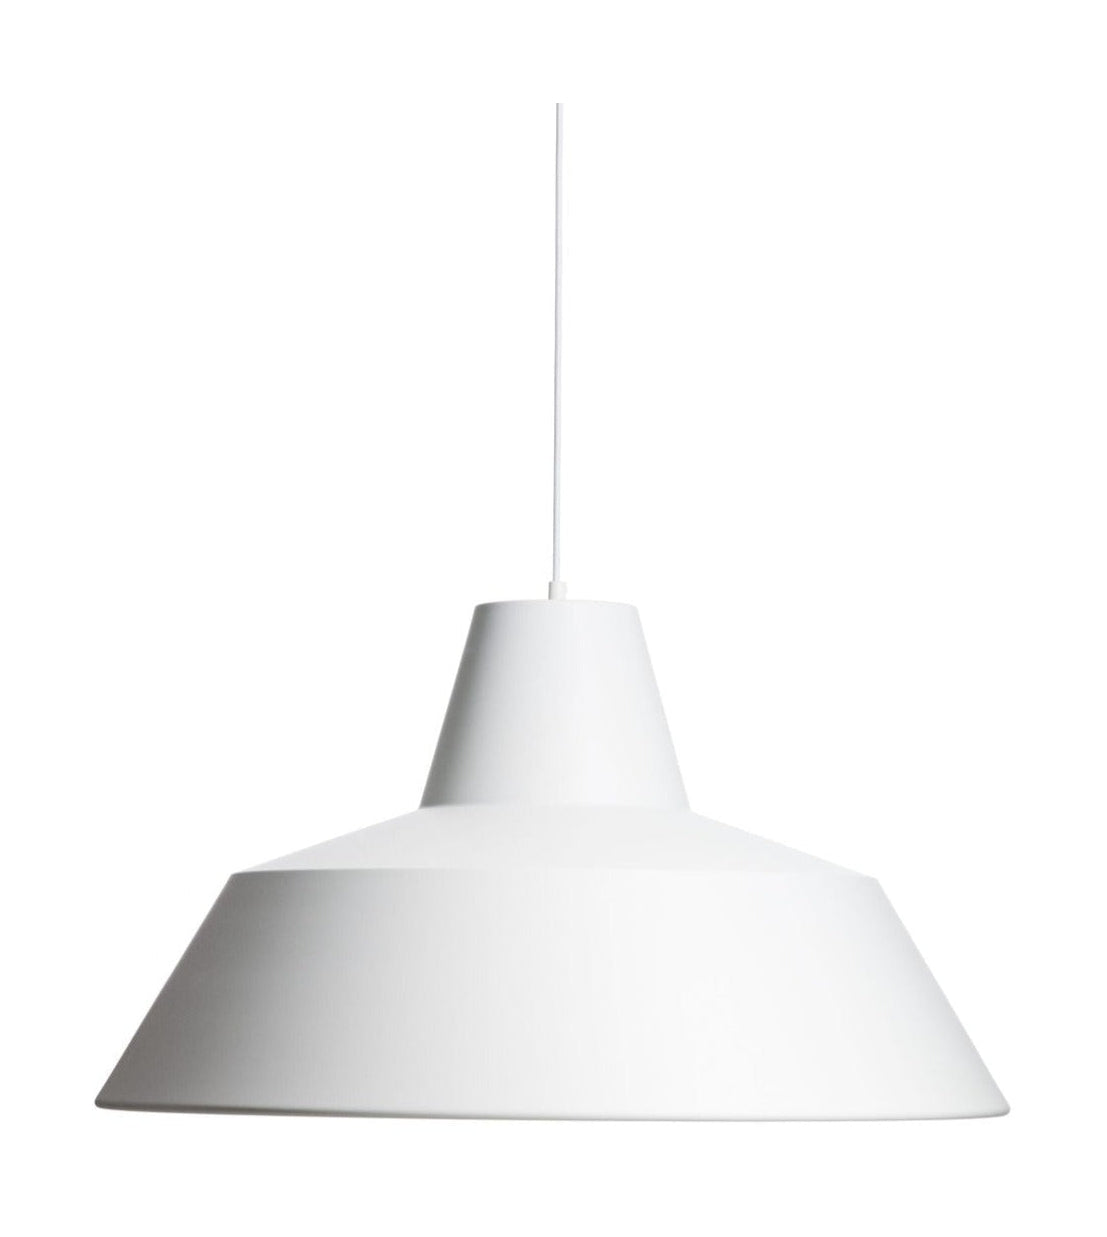 Made By Hand Workshop Suspension Lamp W5, White